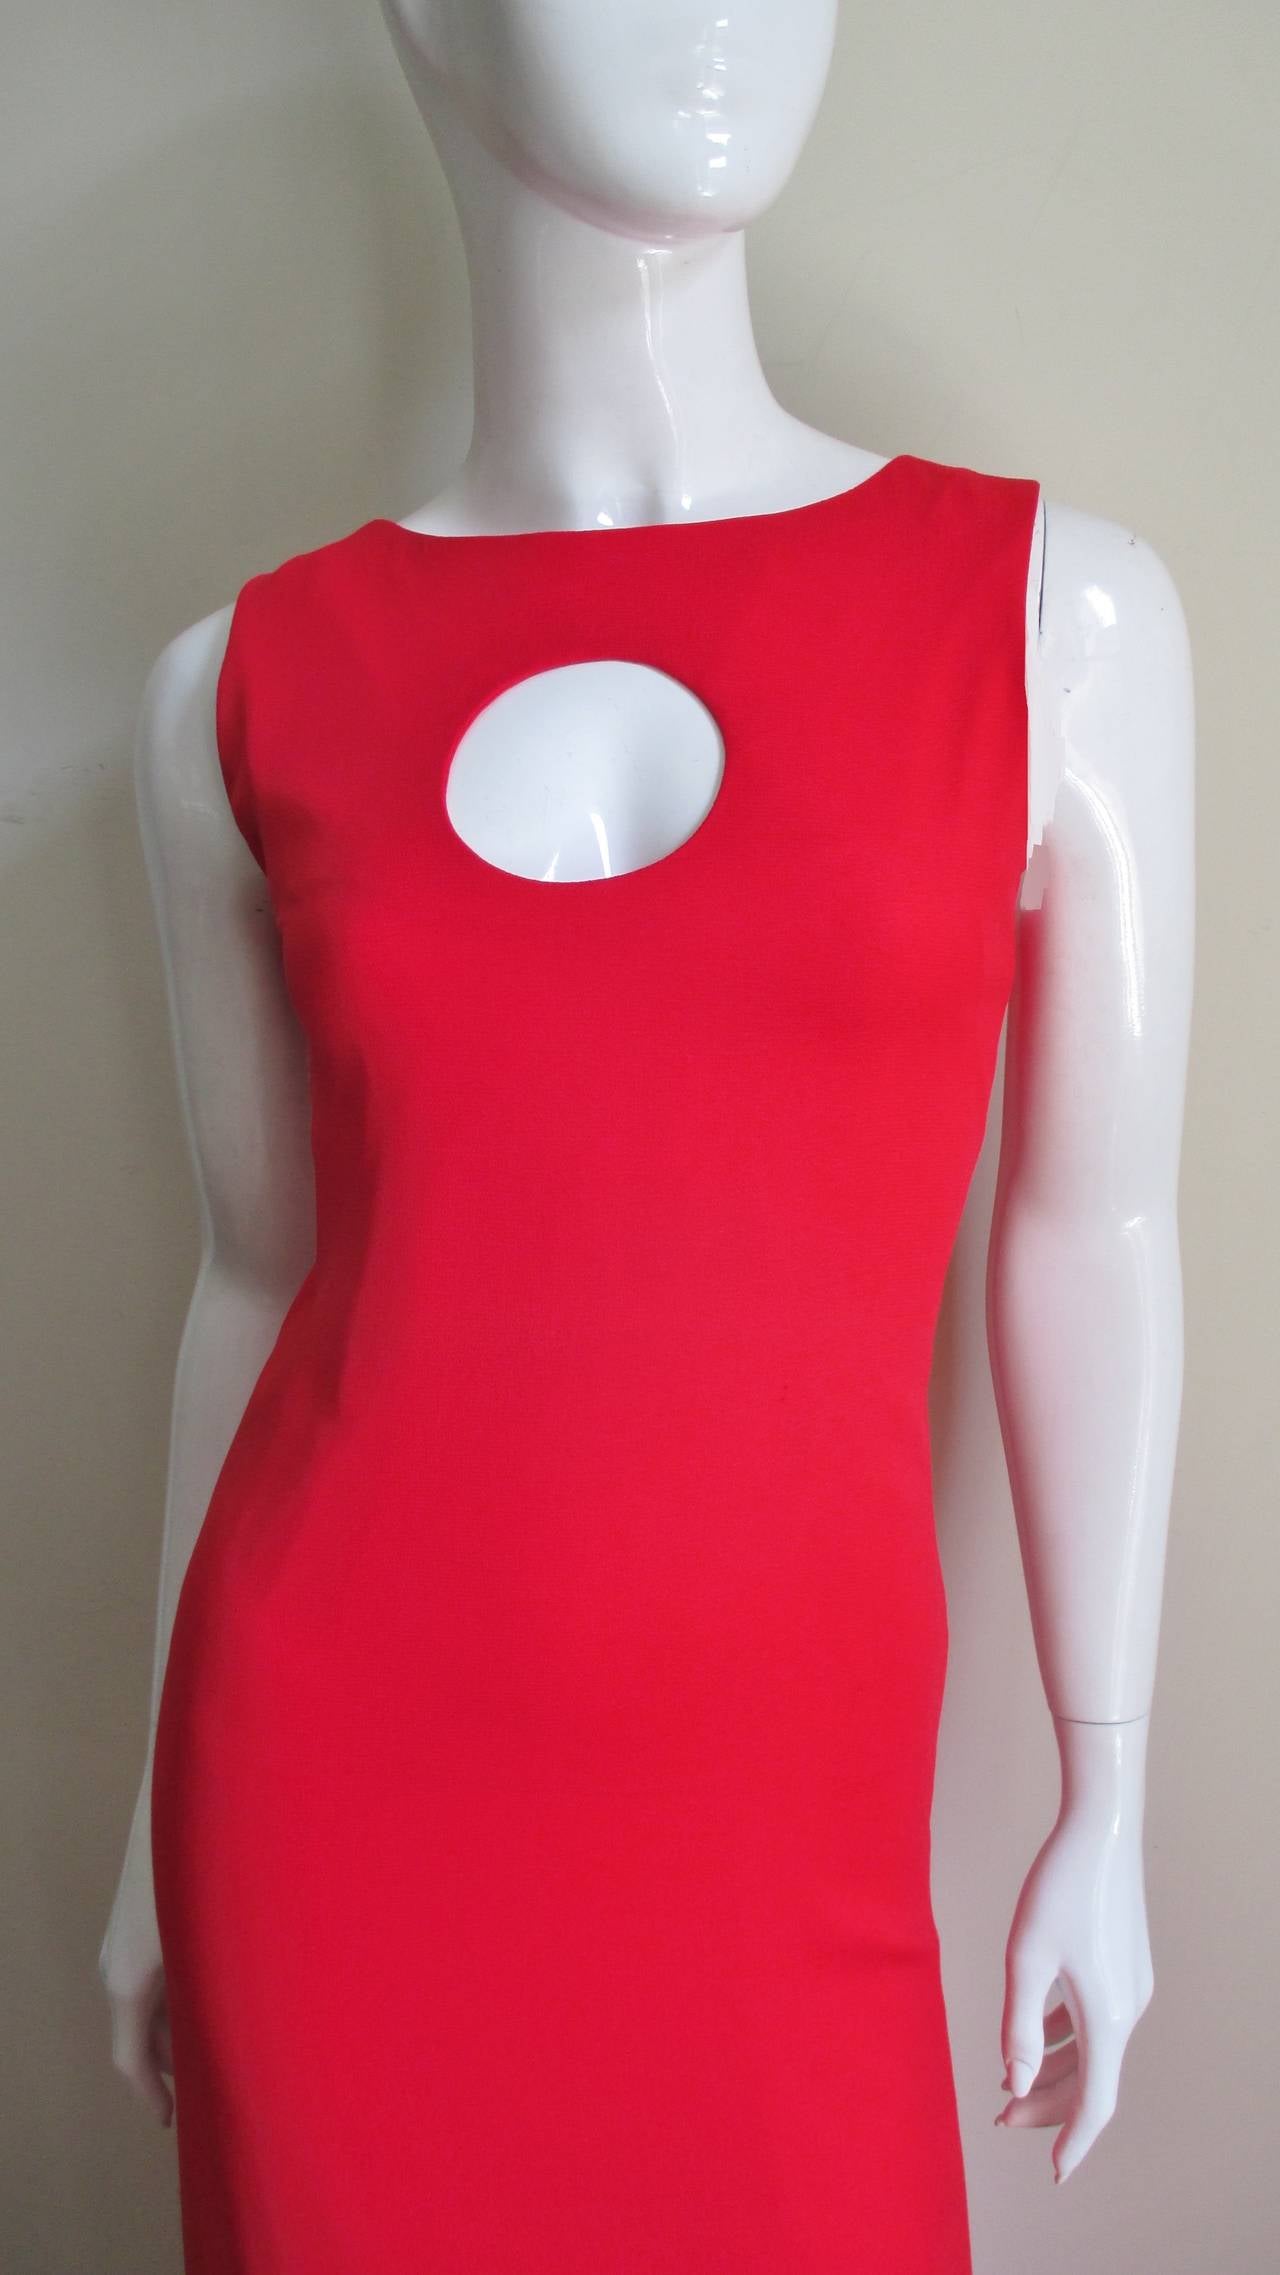 A vintage Pierre Cardin bright red crepe full length dress with a circle cutout at the chest. The neckline is a crew neck from the front with the shoulders forming straps which attach to a straight cut back. The dress skims the body to the waist and